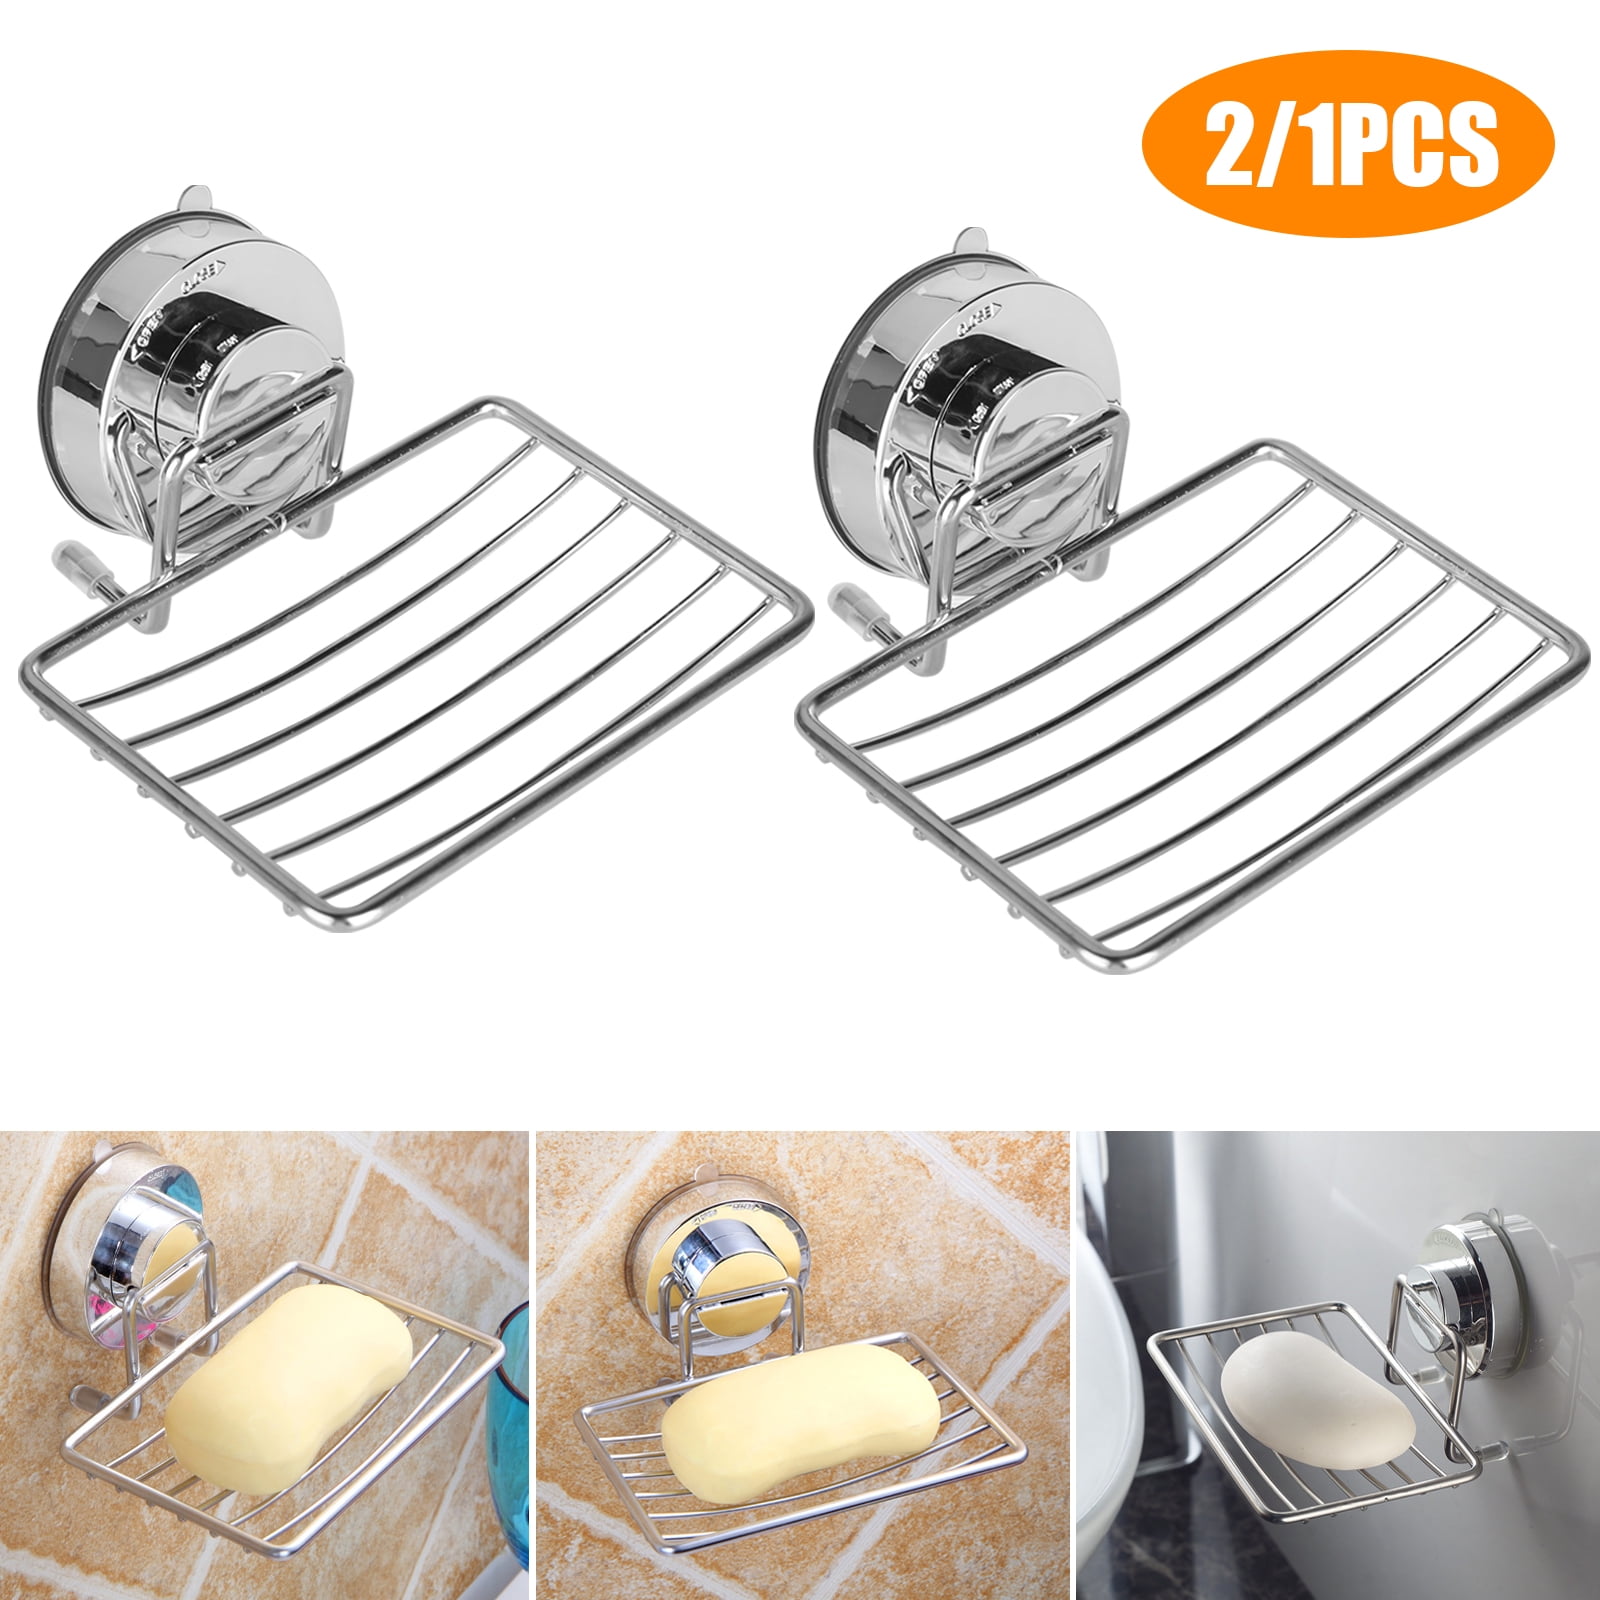 VELMADE Heavy Duty Soap Dish, No-Drilling Reusable Shampoo Bar Soap Holder, Wall Mounted Suction Cup Soap Saver Dish Holder for Shower Bathroom, Tub